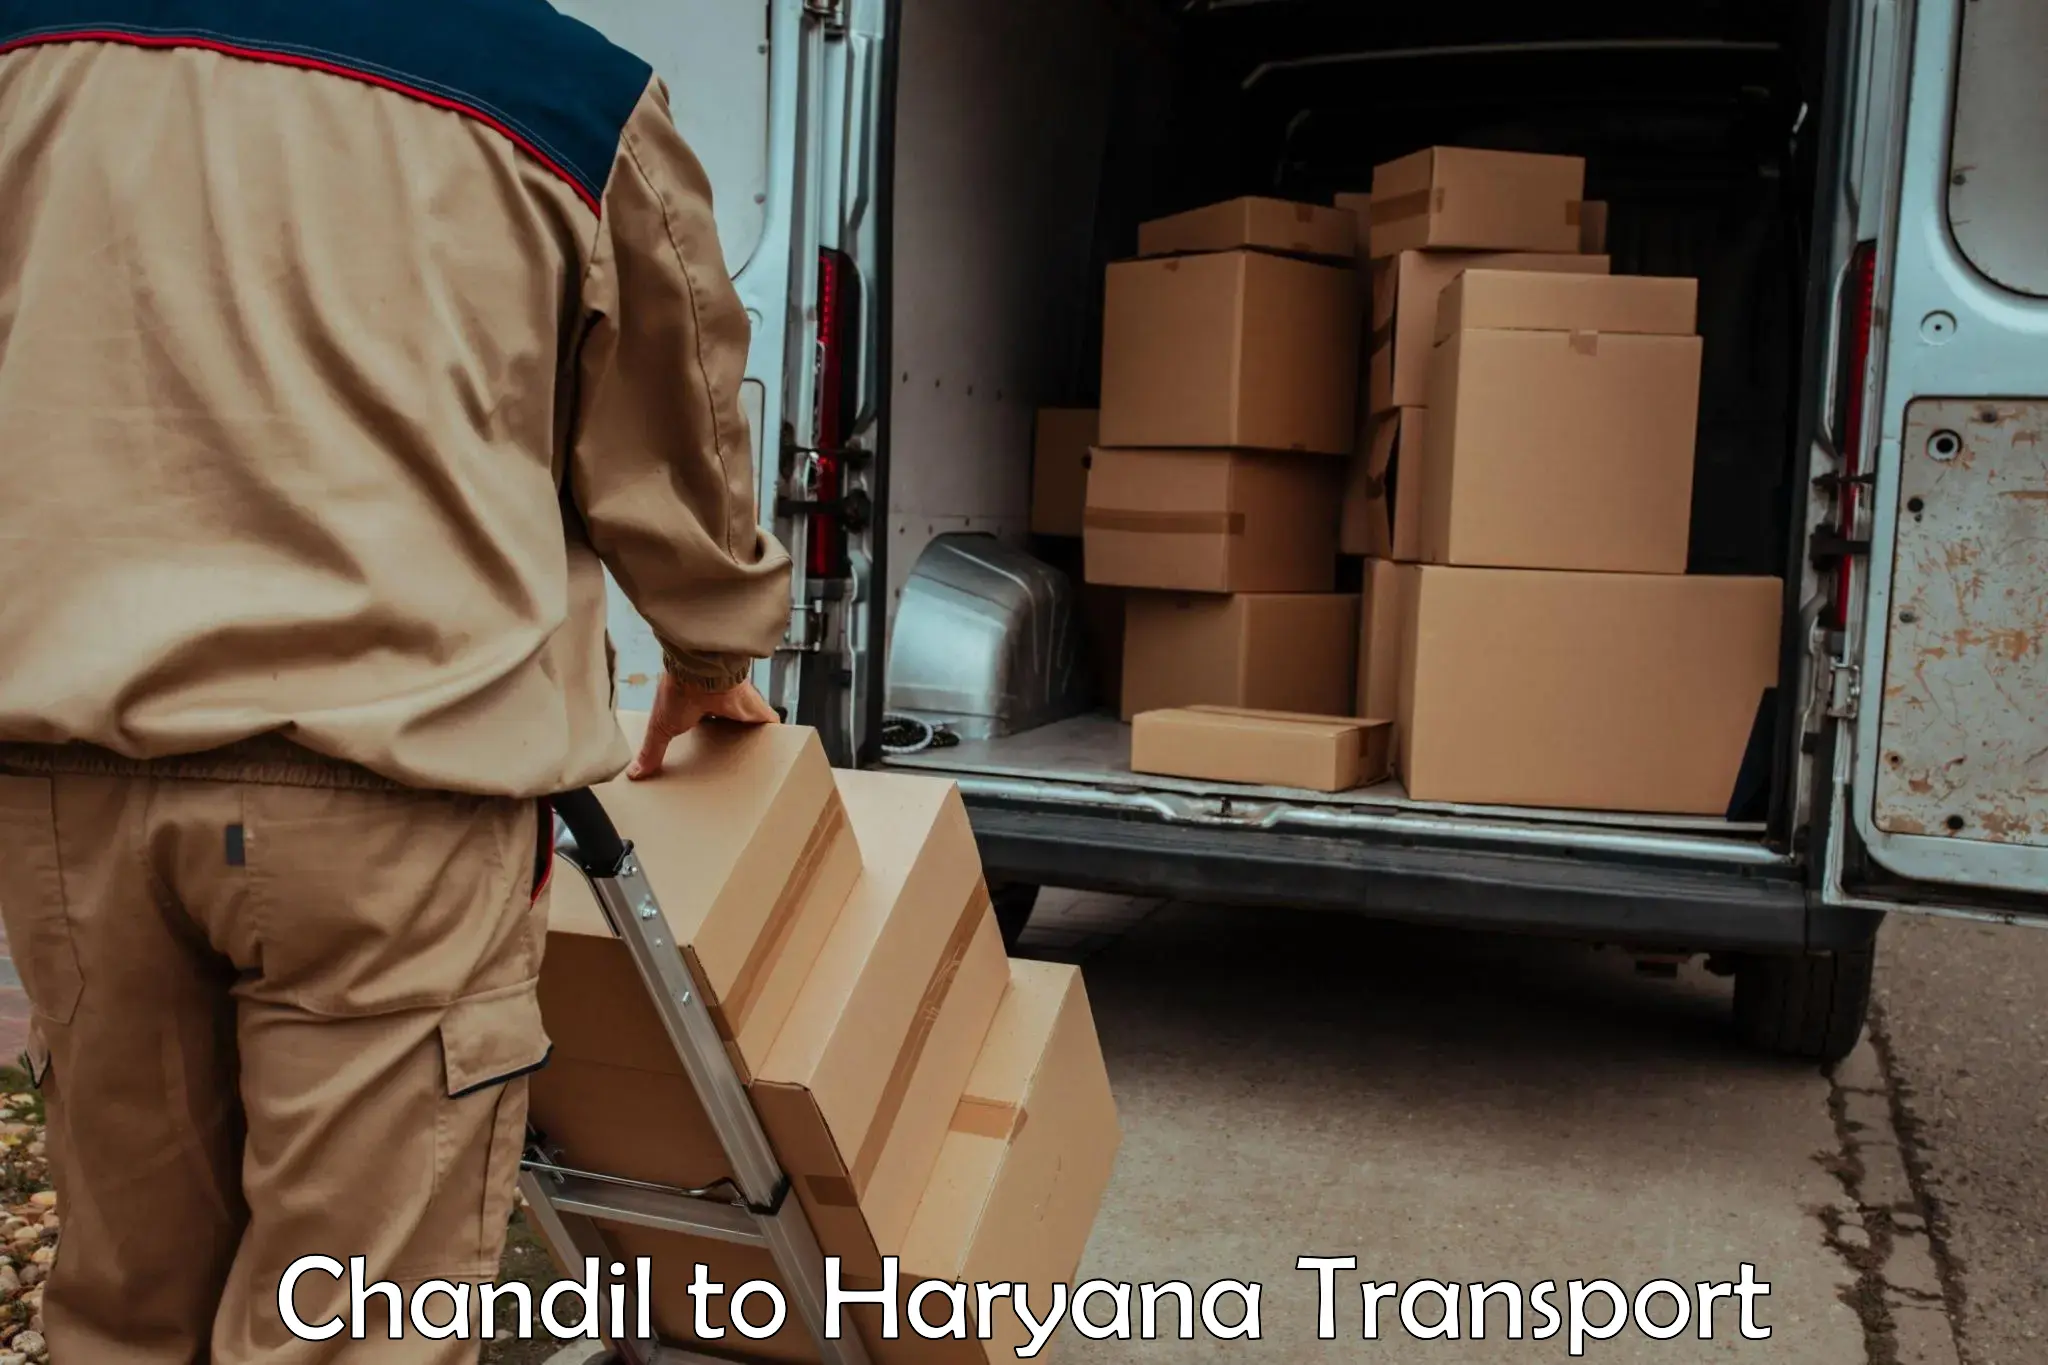 Delivery service Chandil to Bilaspur Haryana